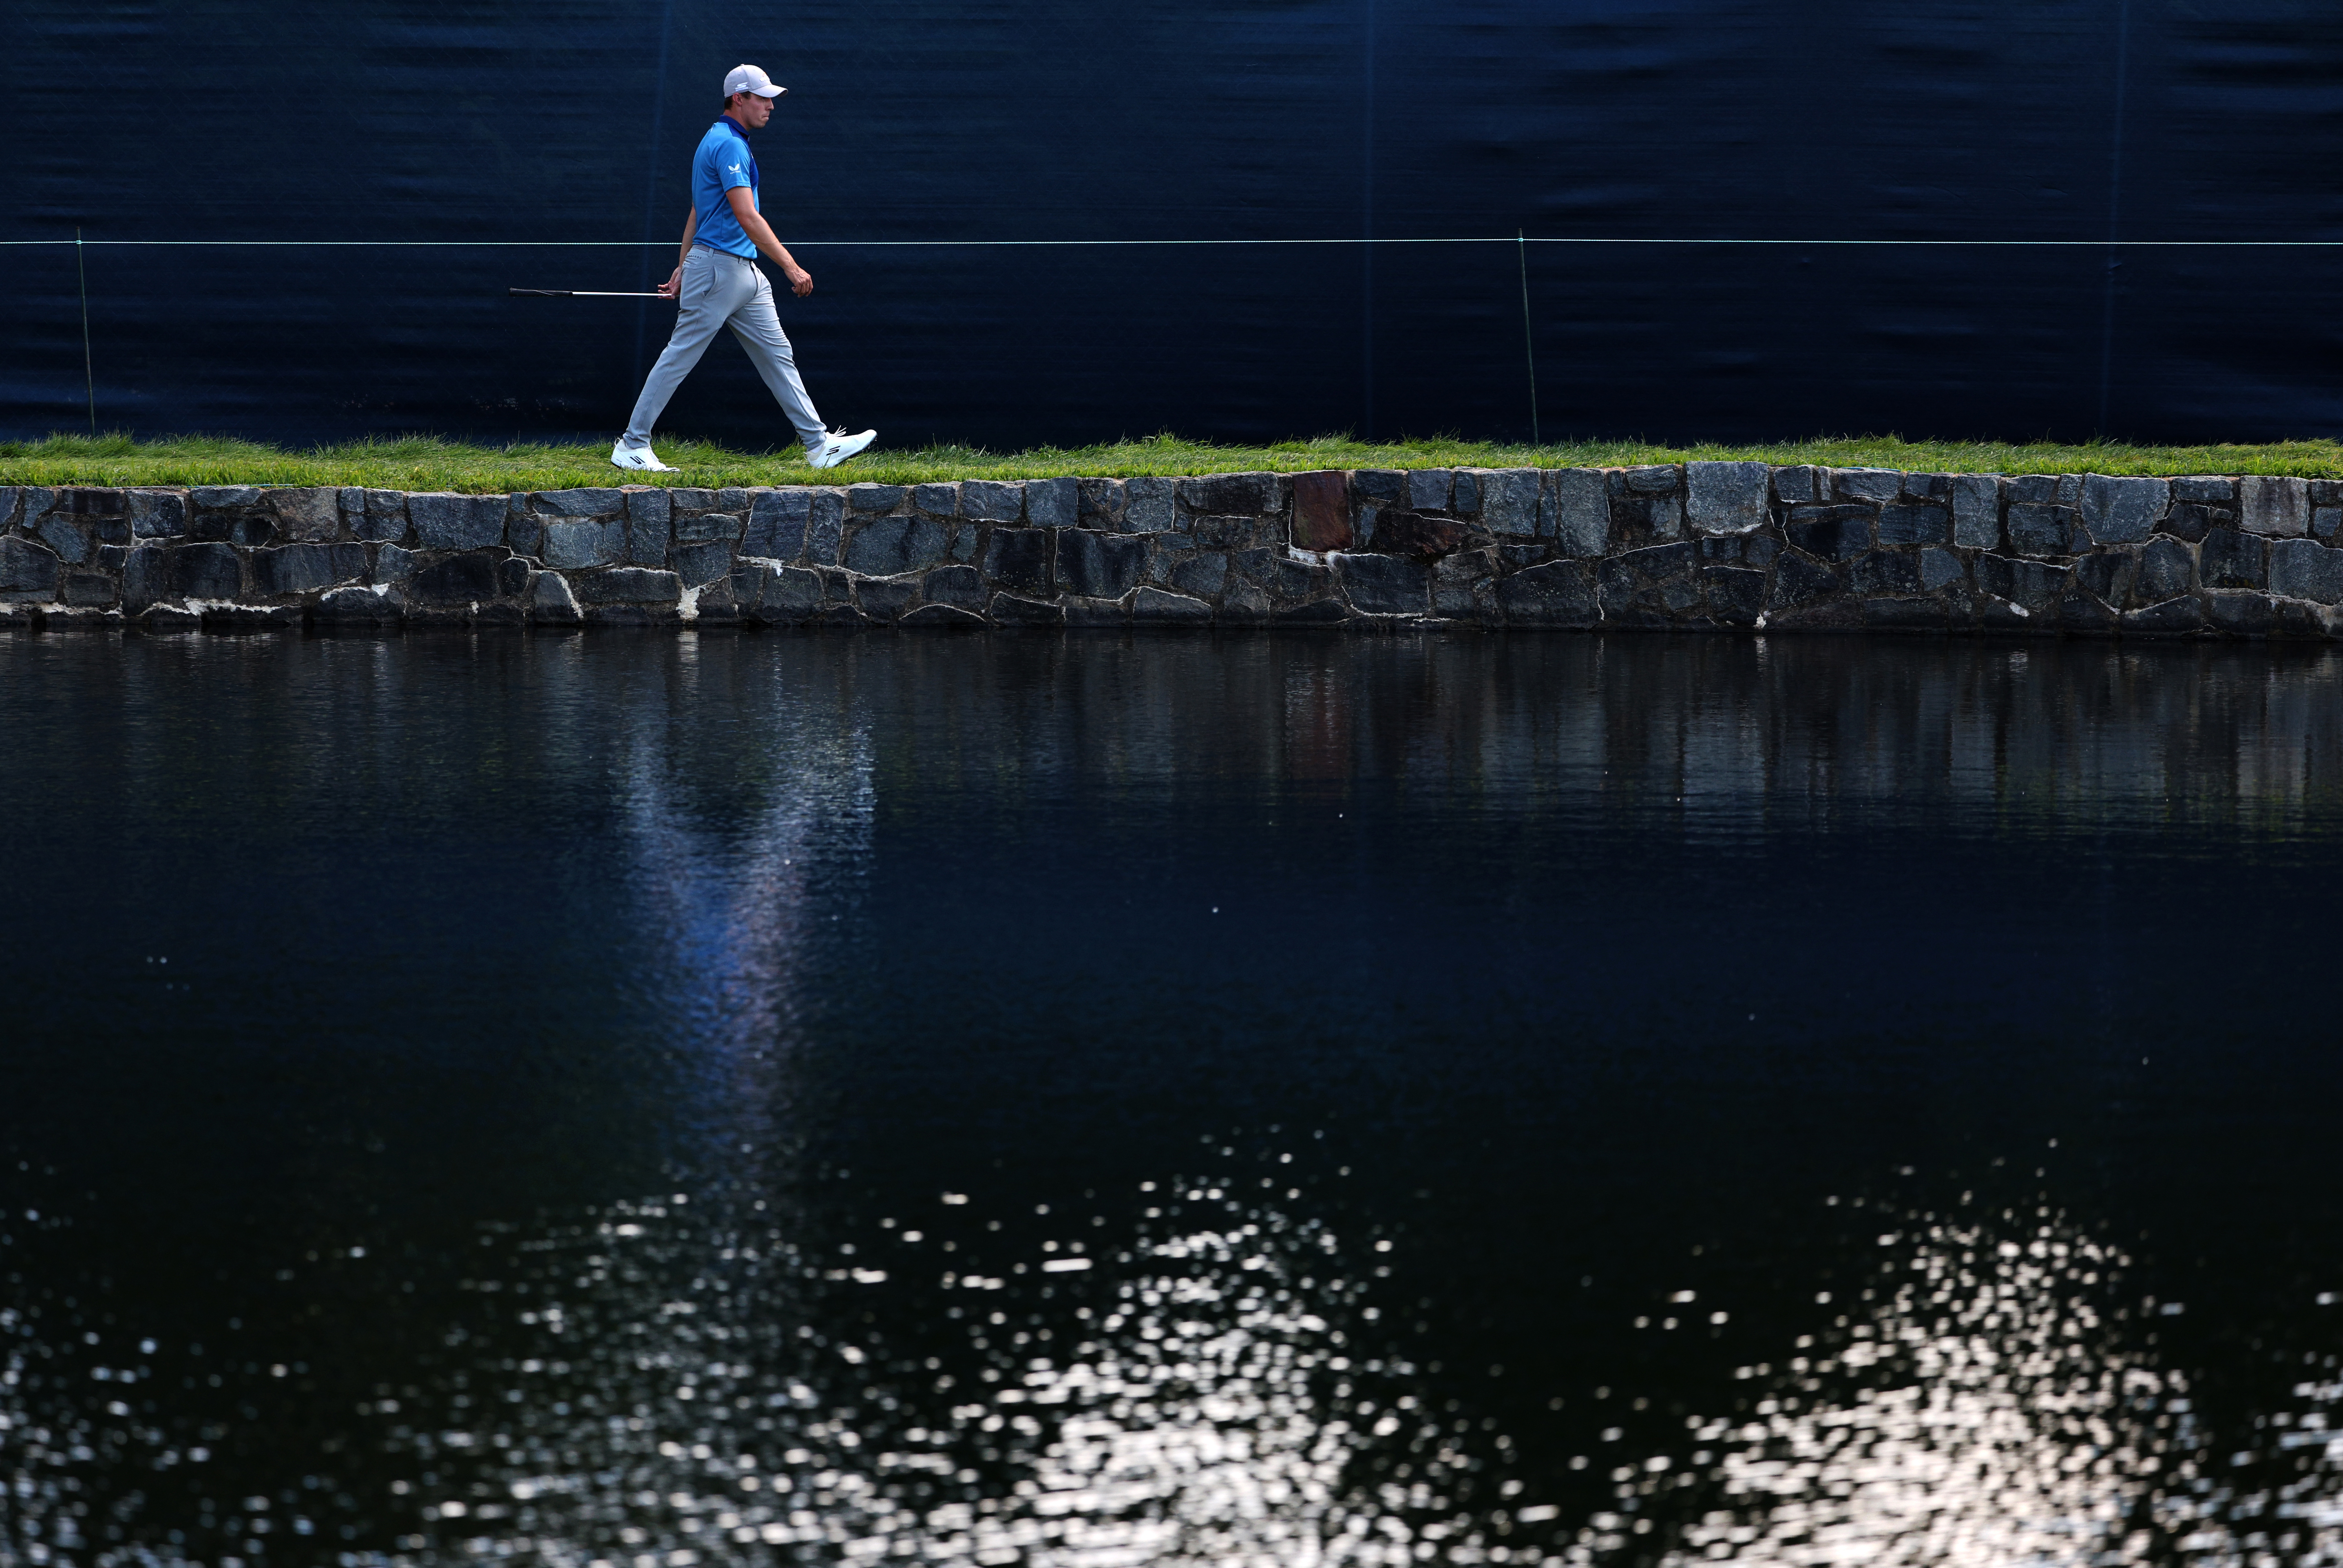 Matt Fitzpatrick of England walks to the 12th green during the second round of the BMW Championship at Wilmington Country Club on August 19, 2022 in Wilmington, Delaware. (Photo by Rob Carr/Getty Images)